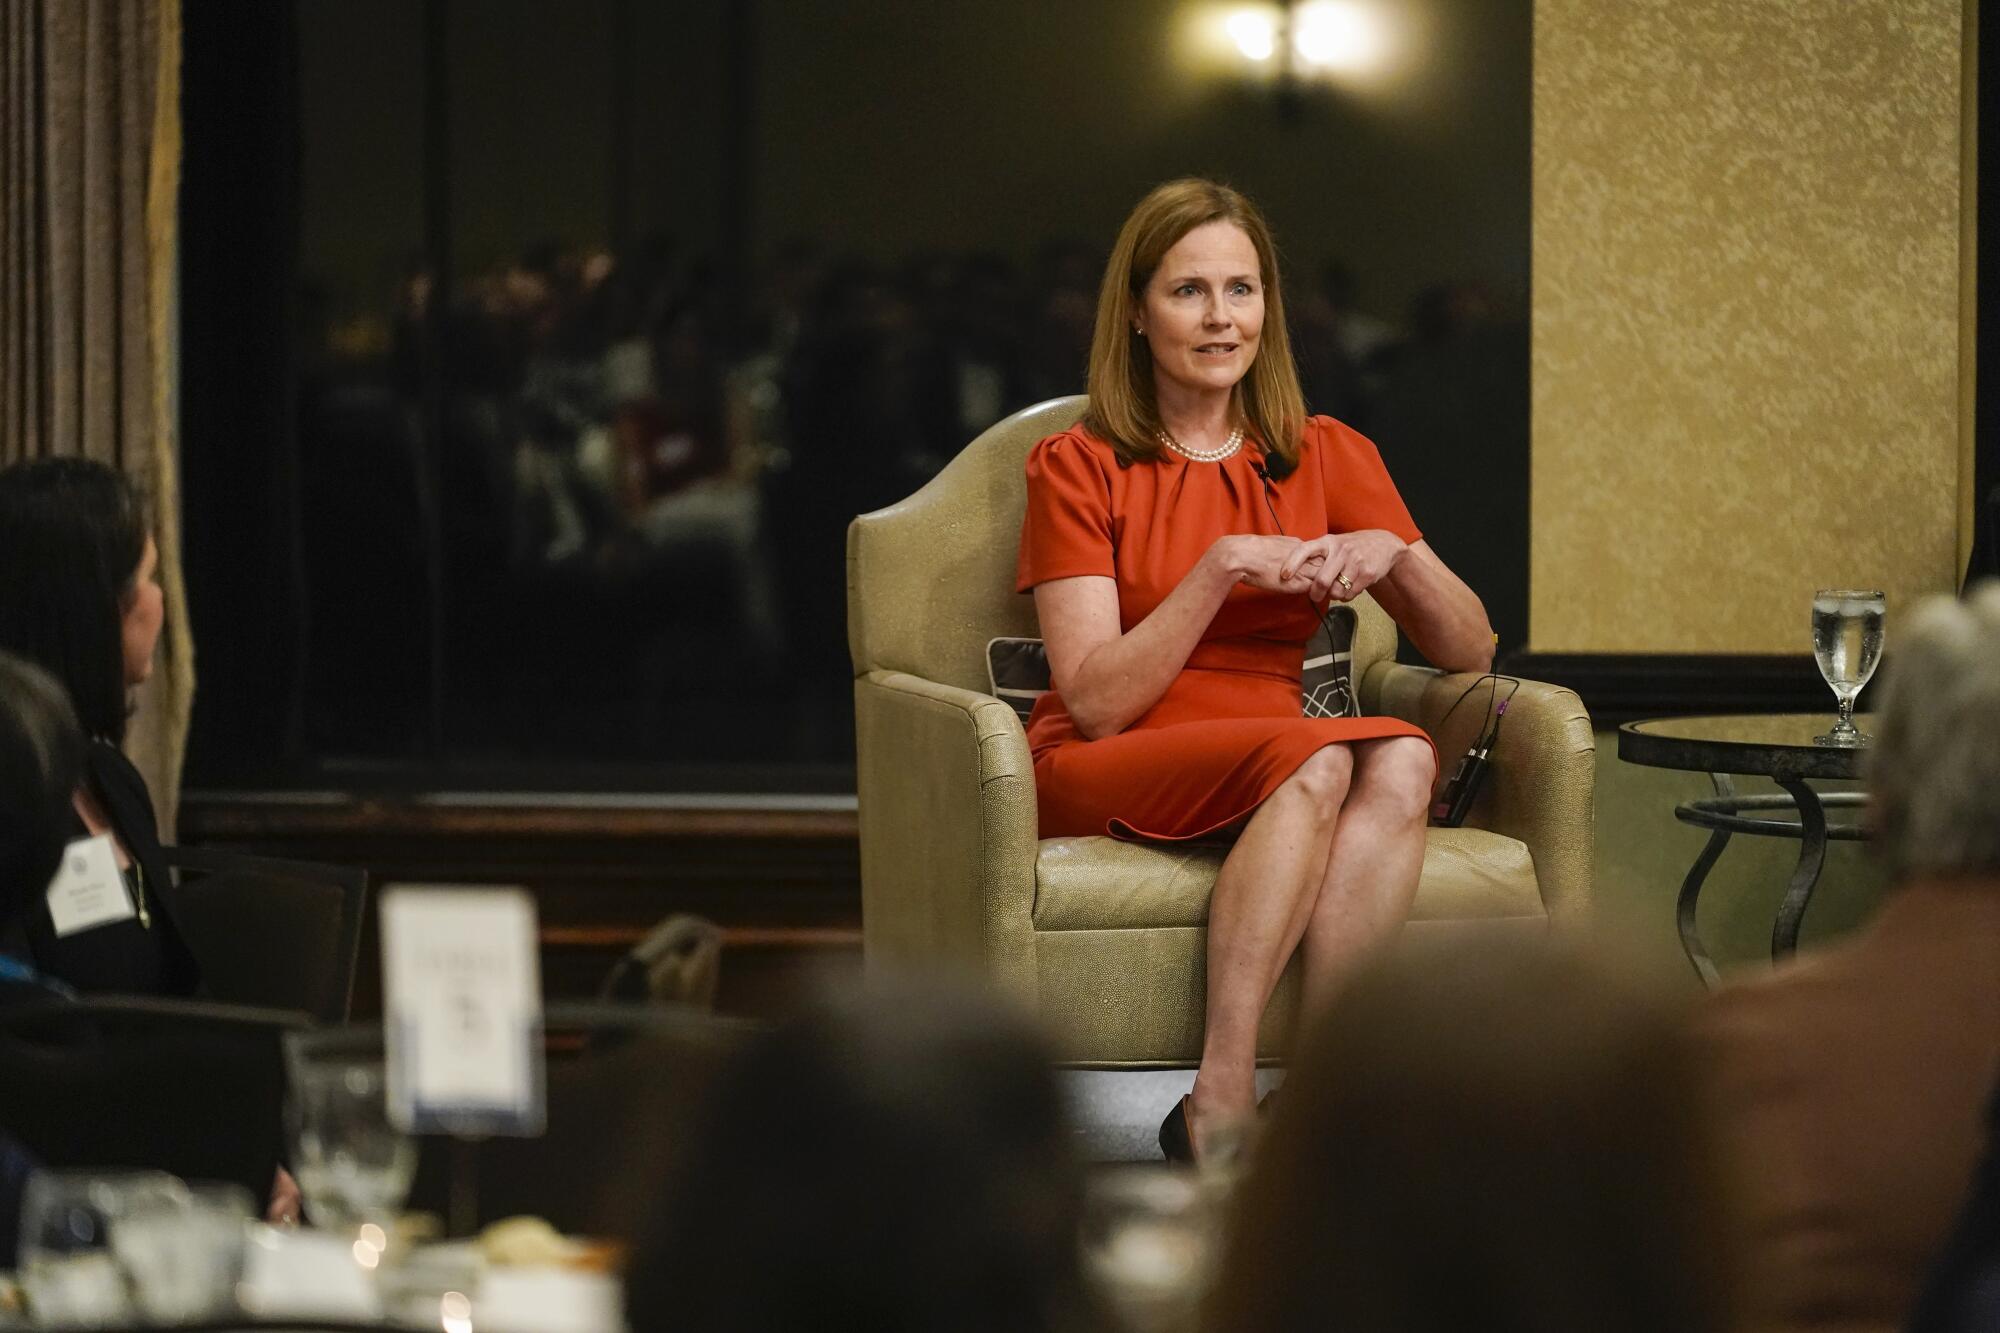 Justice Amy Coney Barrett, in an orange-red dress, sits and addresses a small group, reflected in the window behind her